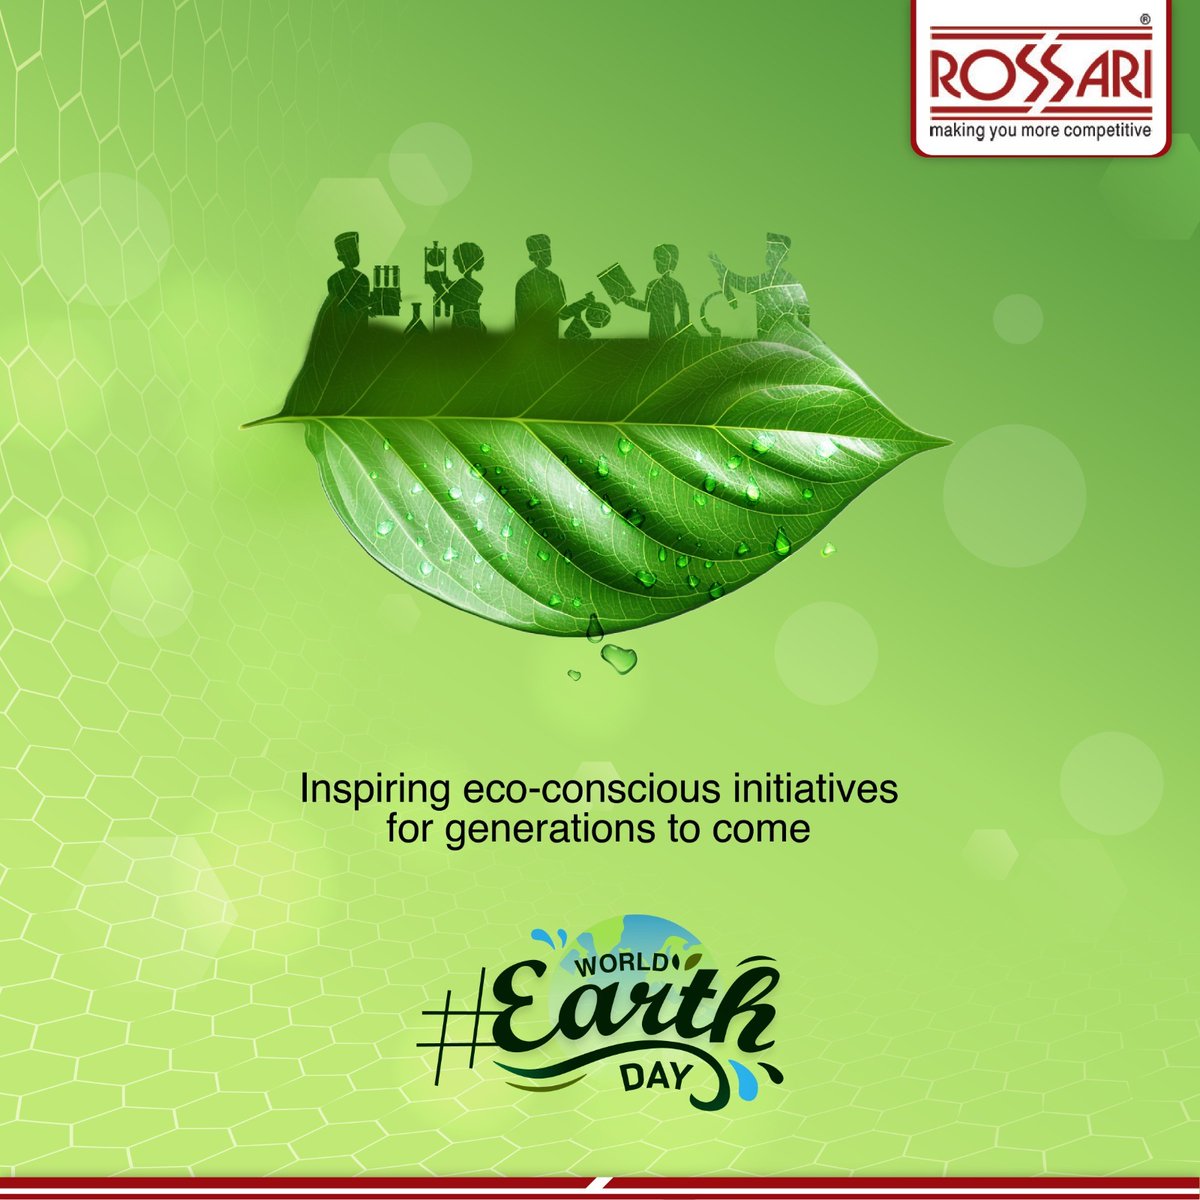 As we celebrate World Earth Day, let's unite in crafting a brighter world for the next generations.
#rossari #rossaribiotech #earthday #earthday2024 #InnovateForEarth #SustainableSolutions #BrighterTomorrow #GreenTechAdvancements #EarthDayUnity #RossariGoesGreen #FutureForward